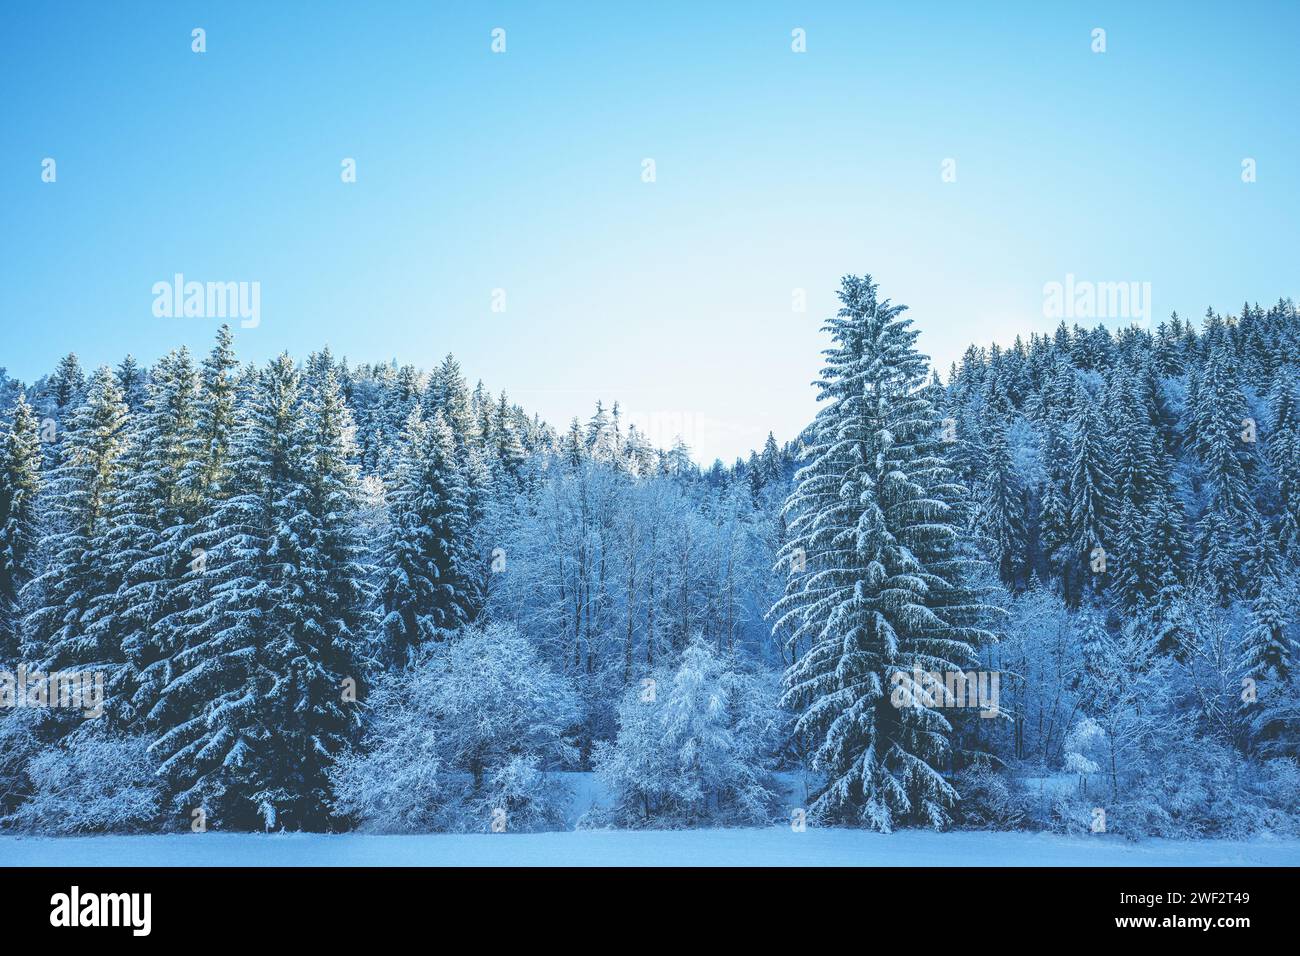 Snow-covered spruce trees on the mountainside in winter Stock Photo